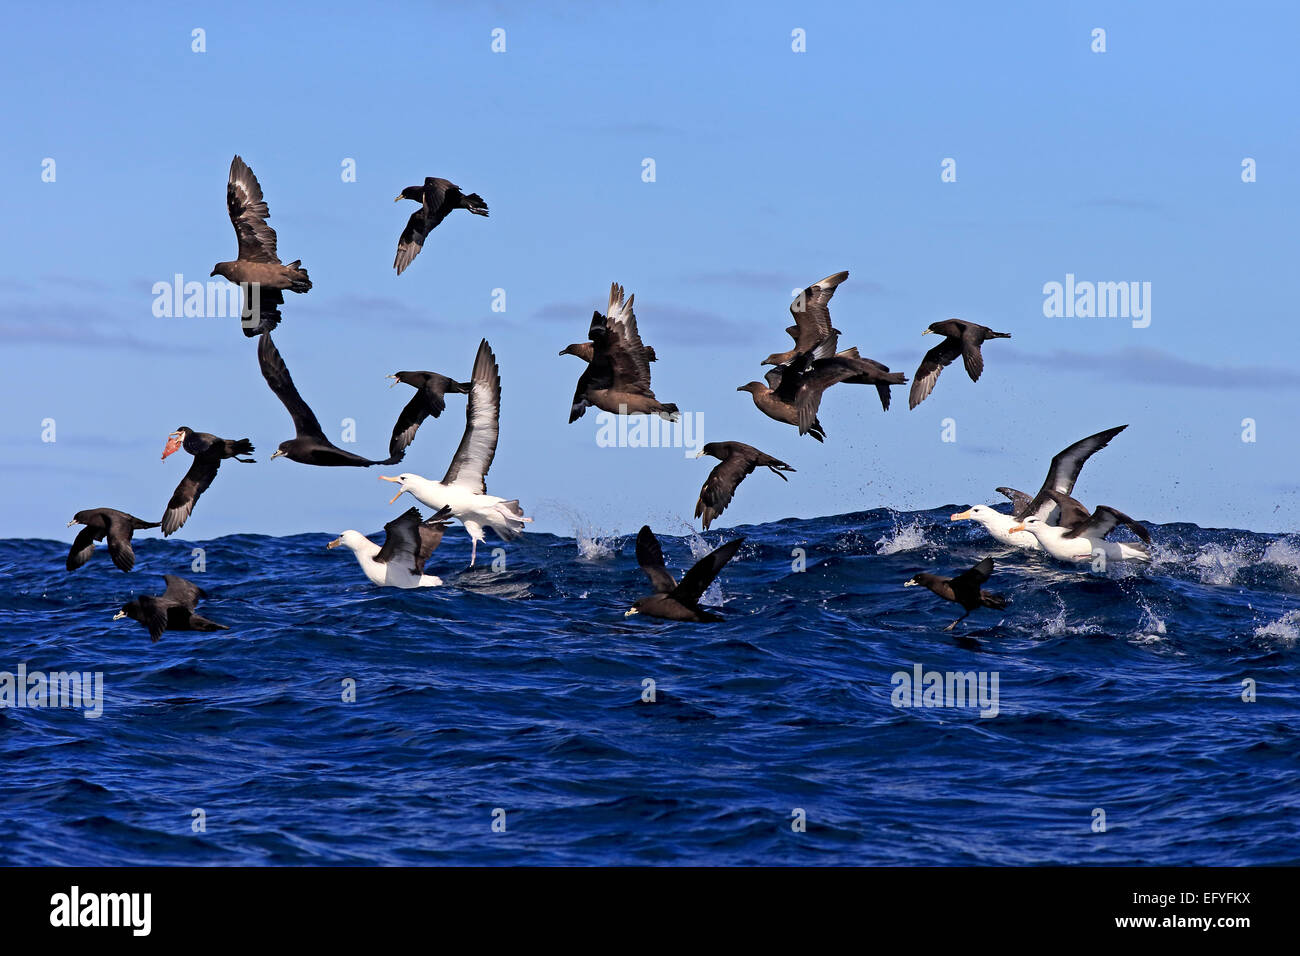 Black-browed albatrosses (Thalassarche melanophrys) and white chin-petrels (Procellaria aequinoctialis) foraging, adult, flying Stock Photo